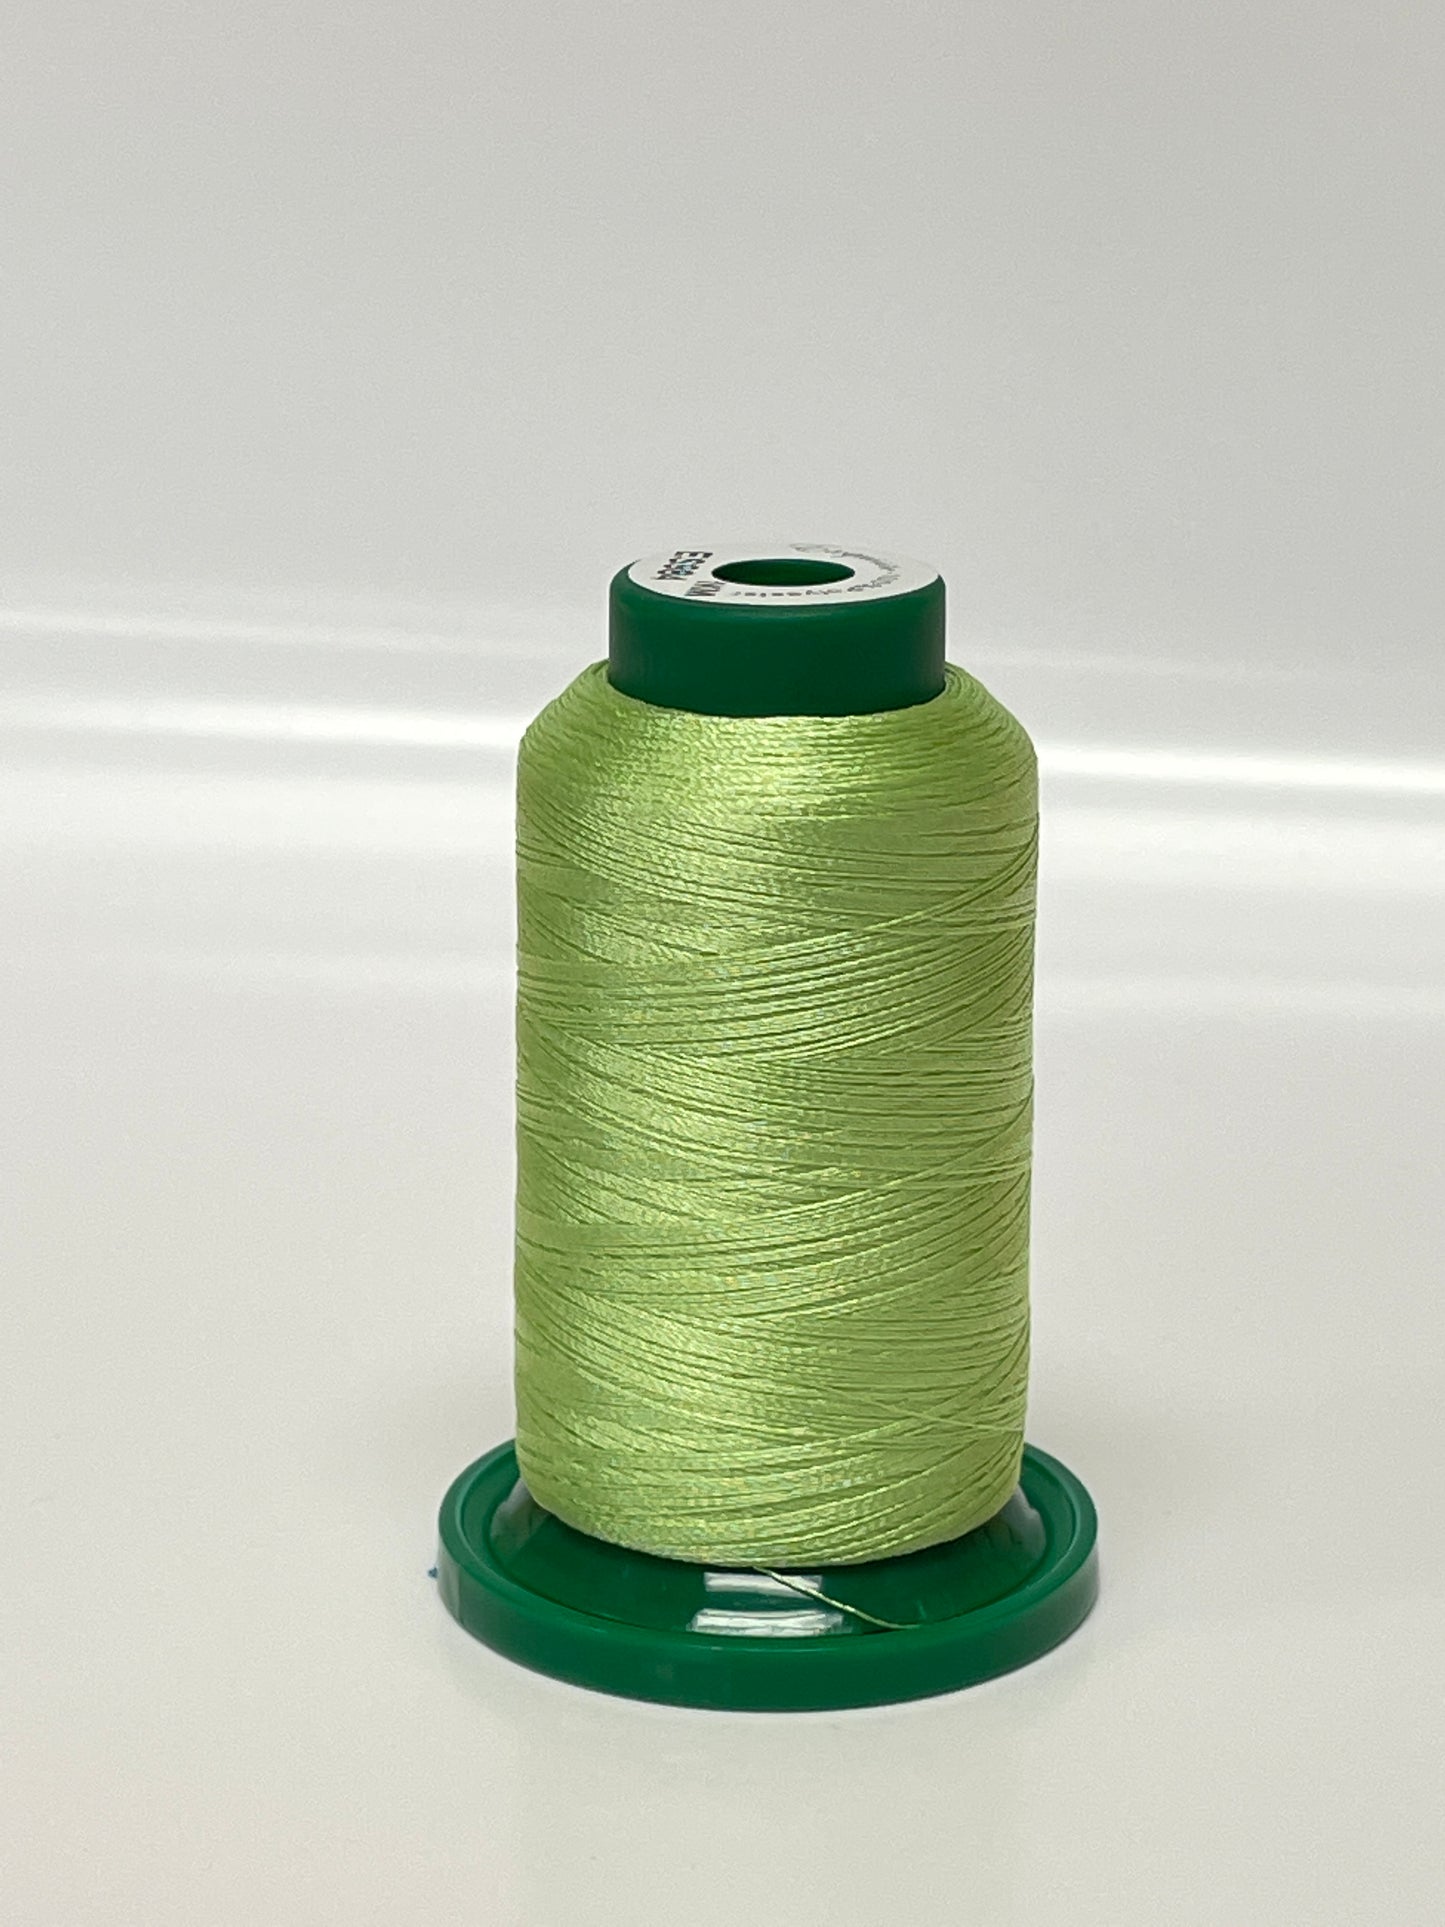 No. 53 silk embroidery thread / 100% silk thread /hand embroidery embroider  cross stitch/jadeite green/9 pure colors